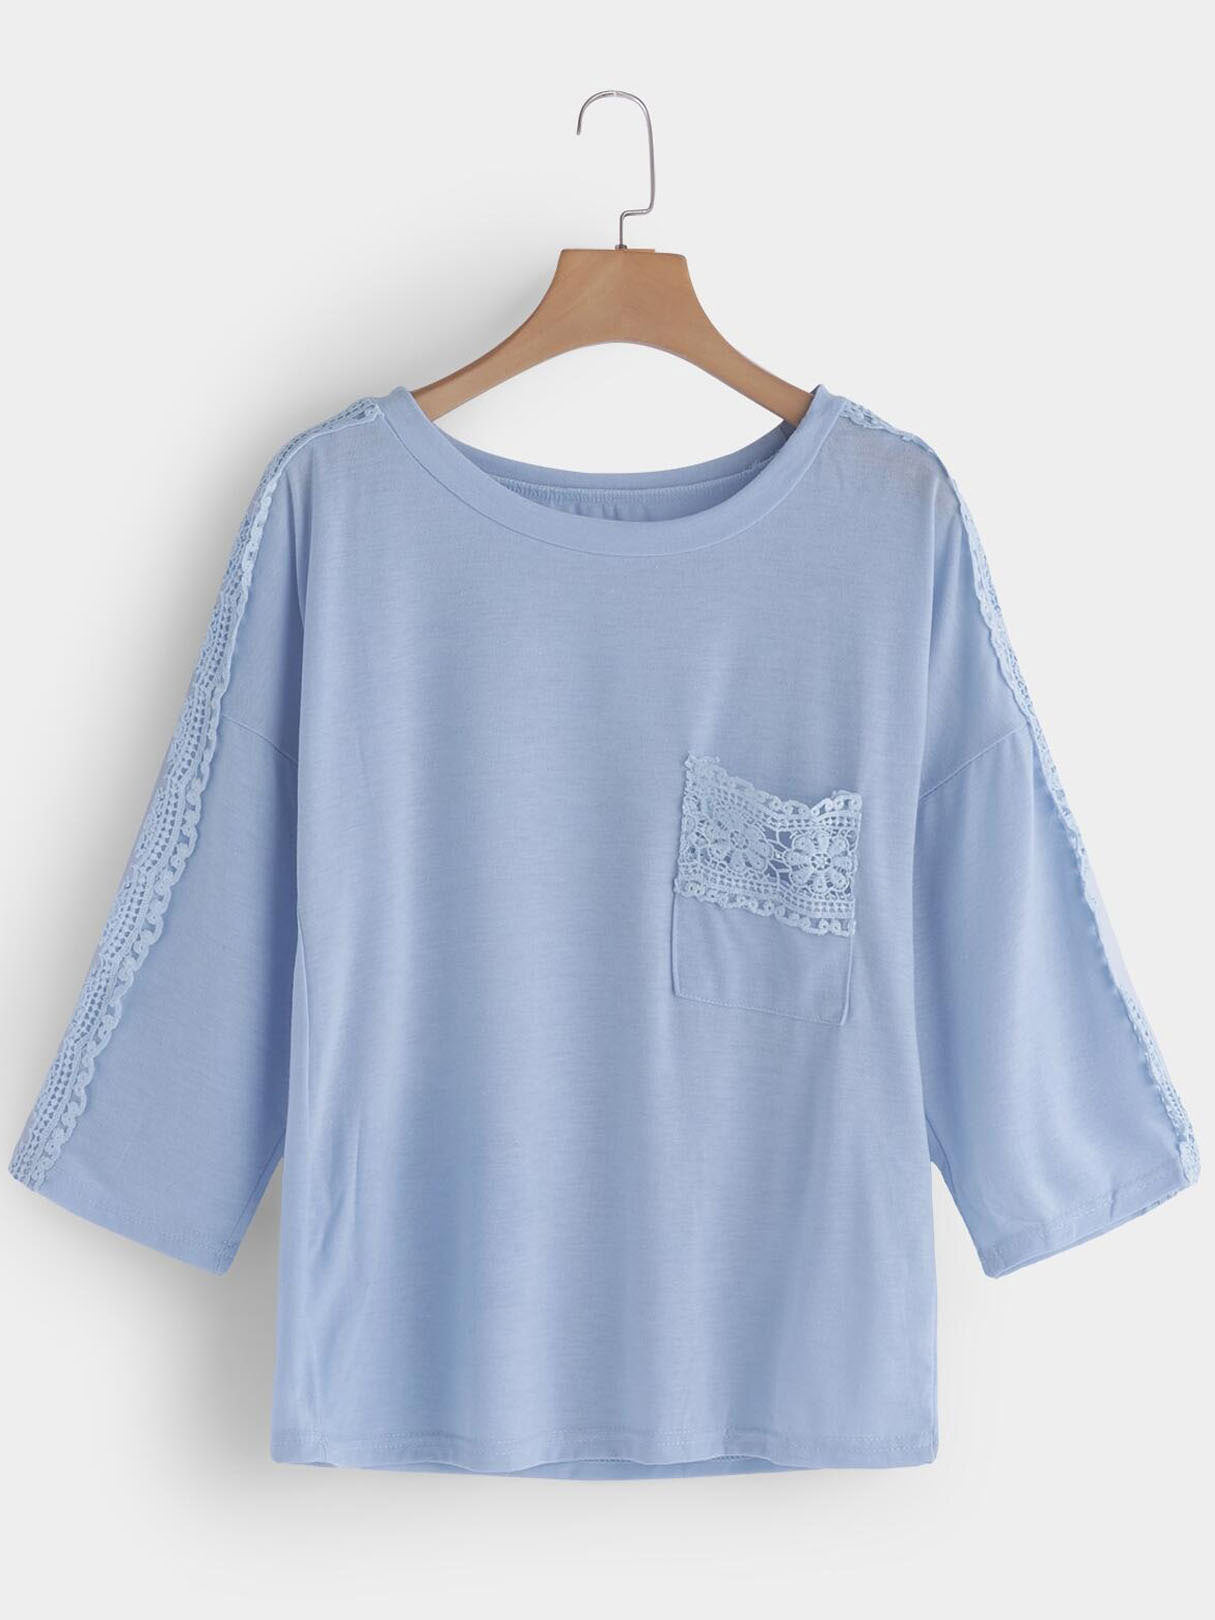 Wholesale Round Neck Pullover Plain Lace 3/4 Sleeve Sky Blue T-Shirts